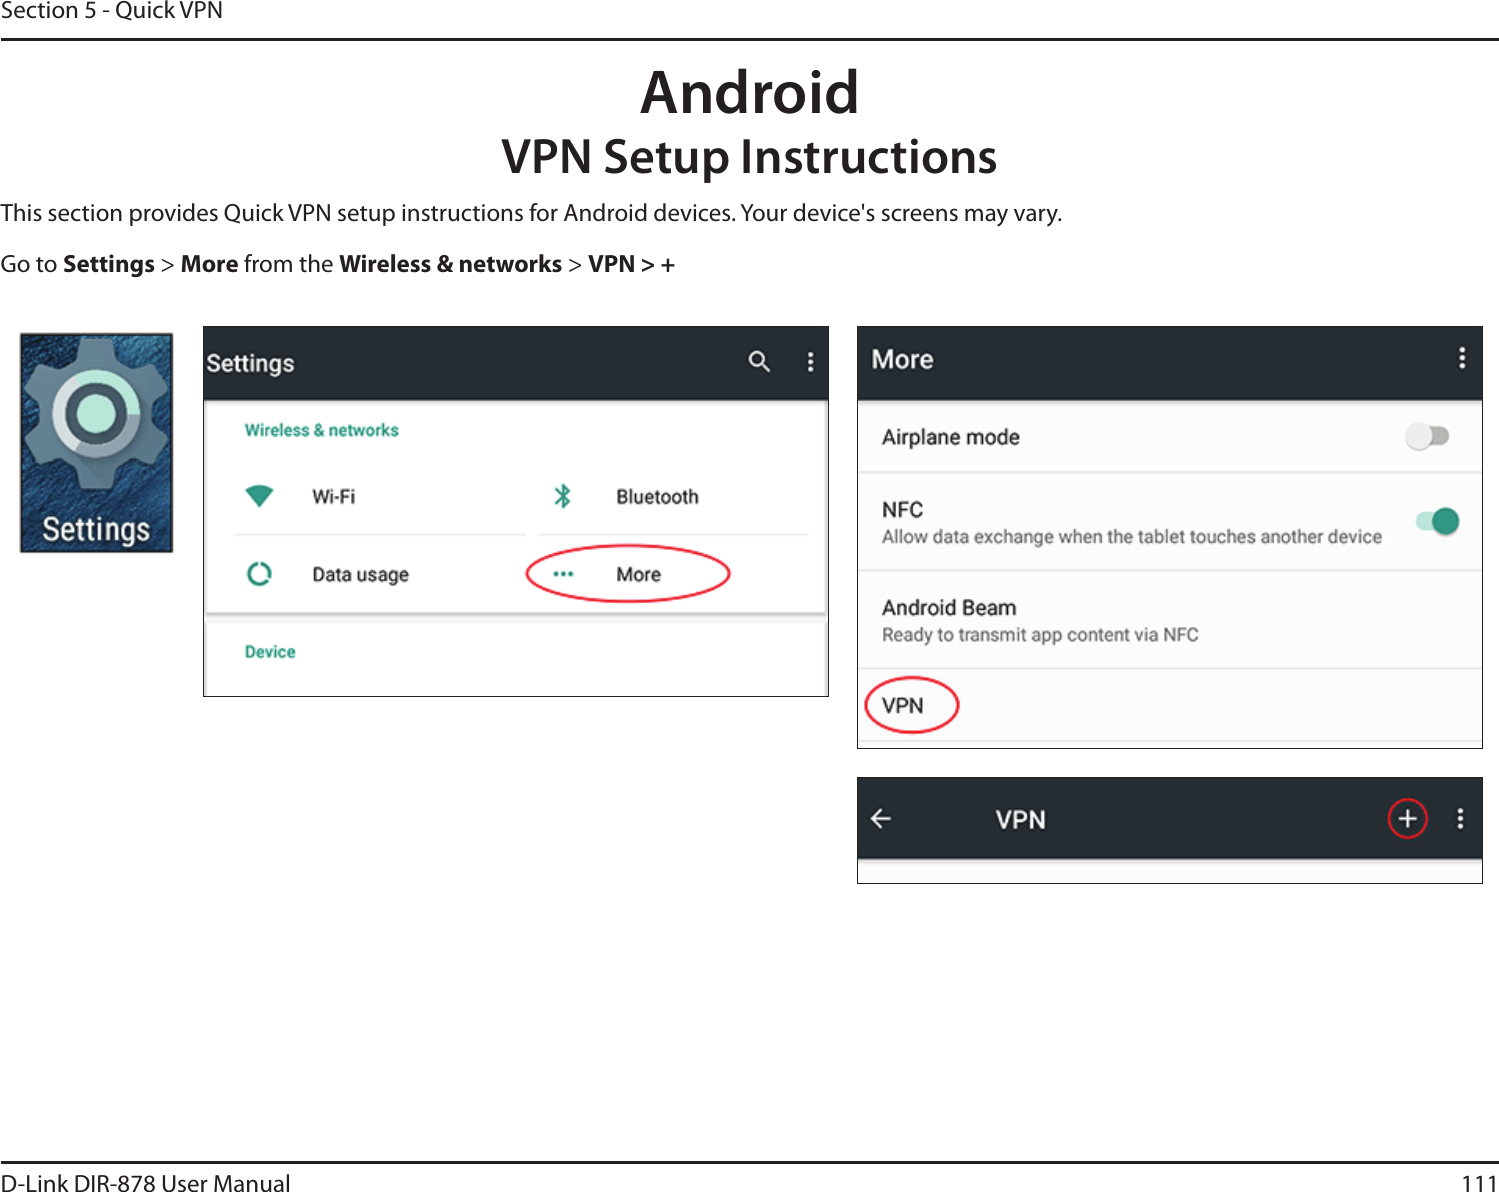 111D-Link DIR-878 User ManualSection 5 - Quick VPNThis section provides Quick VPN setup instructions for Android devices. Your device&apos;s screens may vary.Go to Settings &gt; More from the Wireless &amp; networks &gt; 71/AndroidVPN Setup Instructions